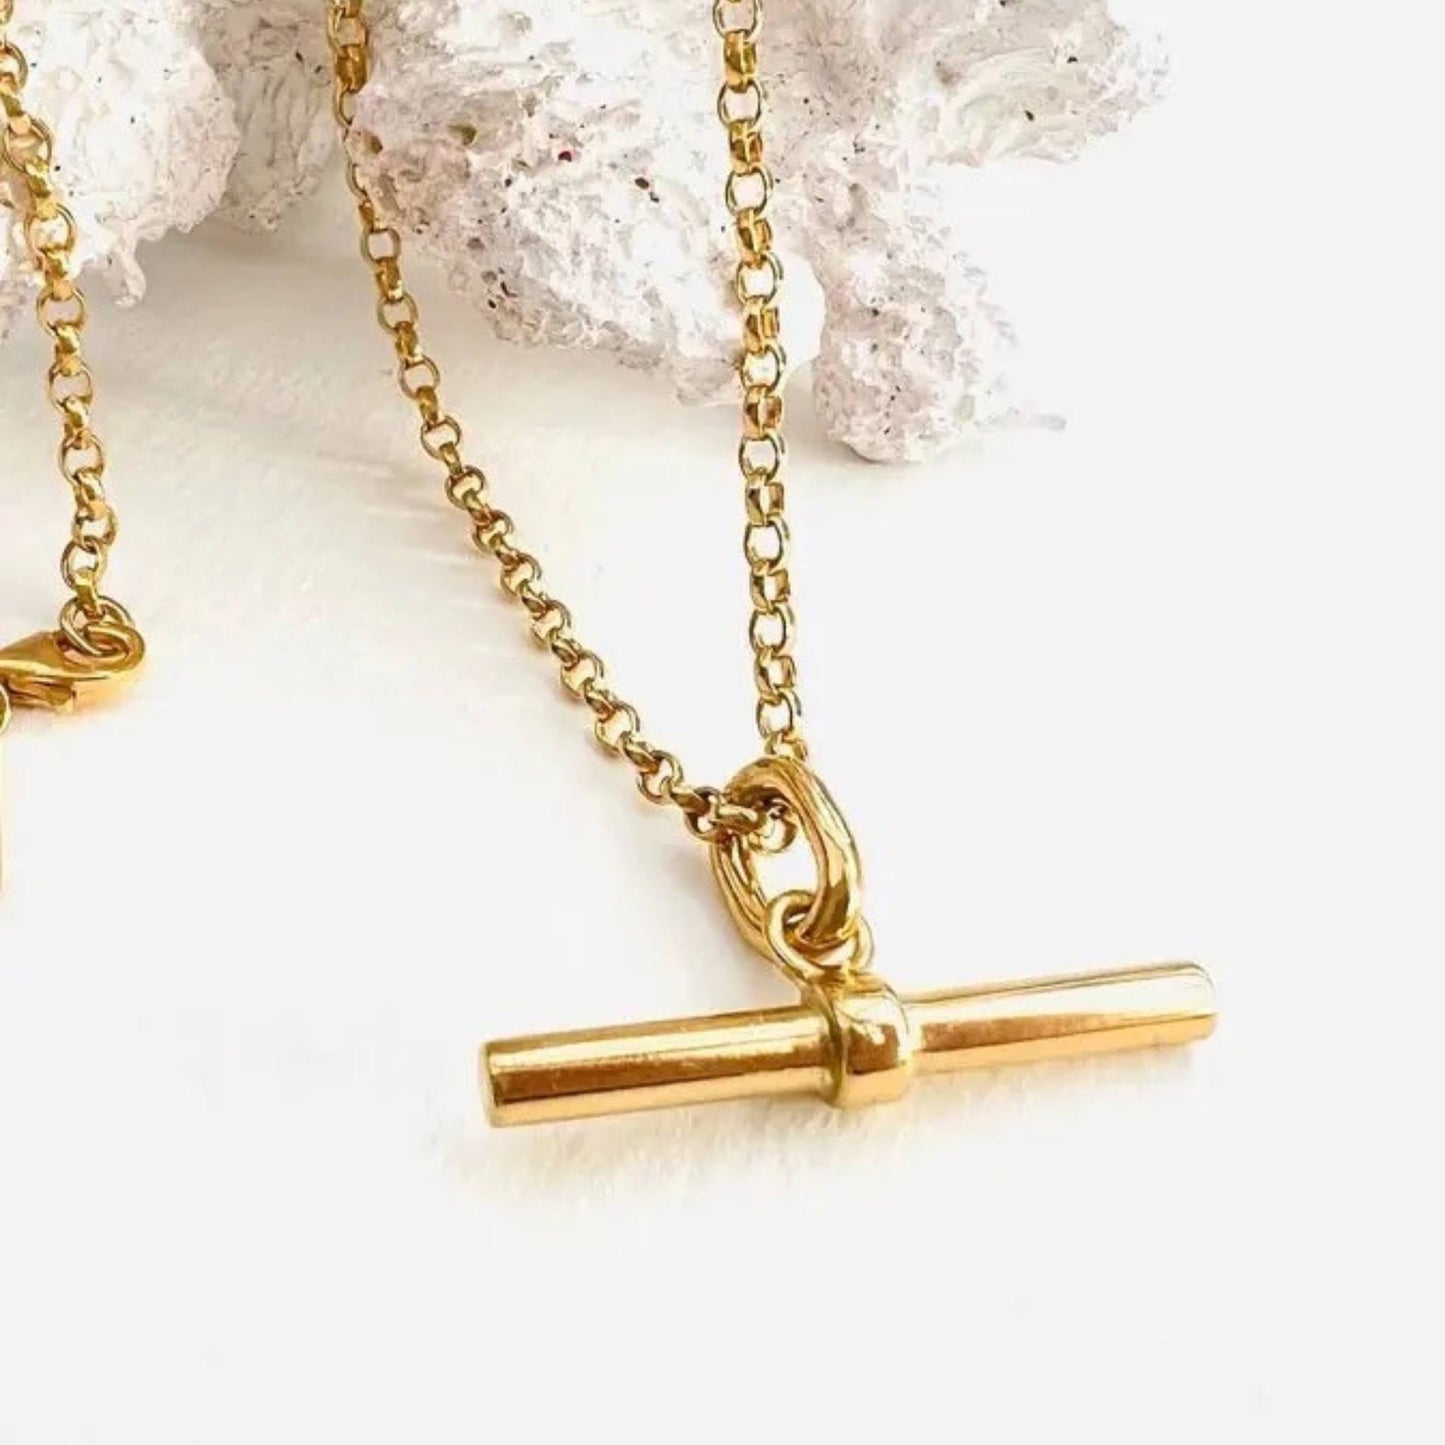 Gold T bar Chain Necklace